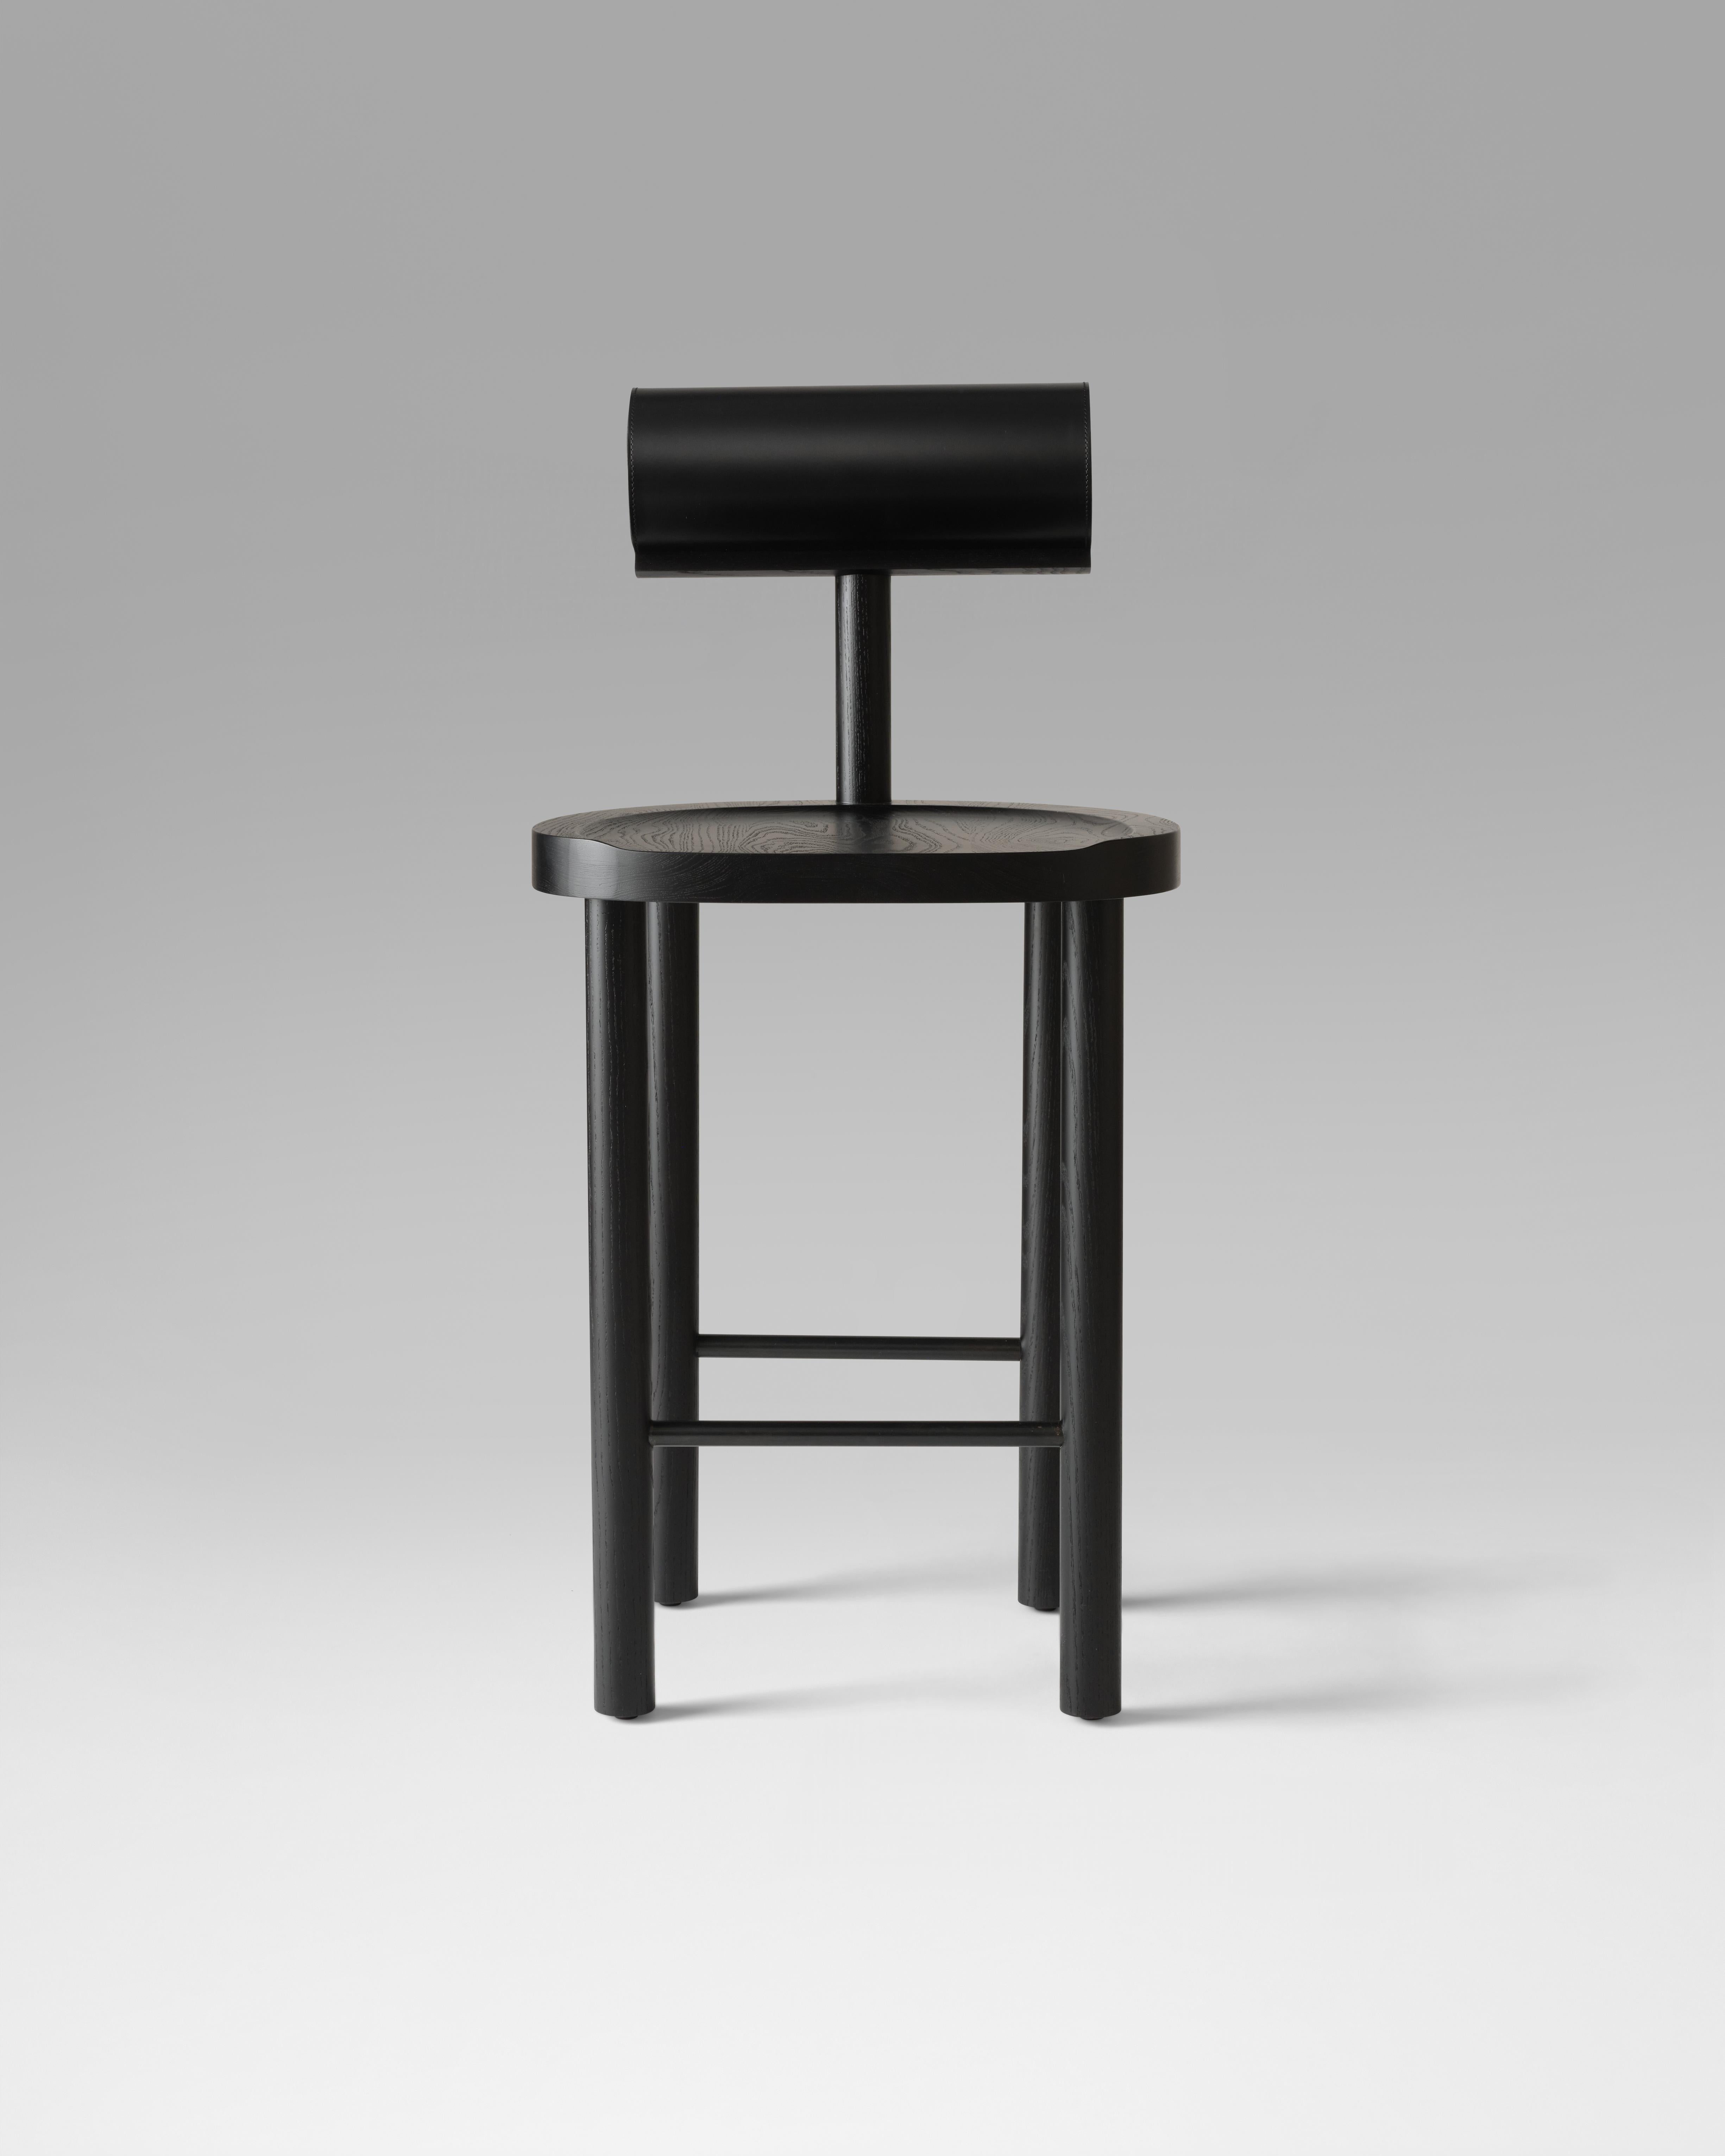 The UNA counter stool intersects a round wooden seat and legs with a leather upholstered cylindrical back. Using these fluid shapes allows greater focus on the details of the wood grain and pristinely stitched leather top. 

Made of solid black